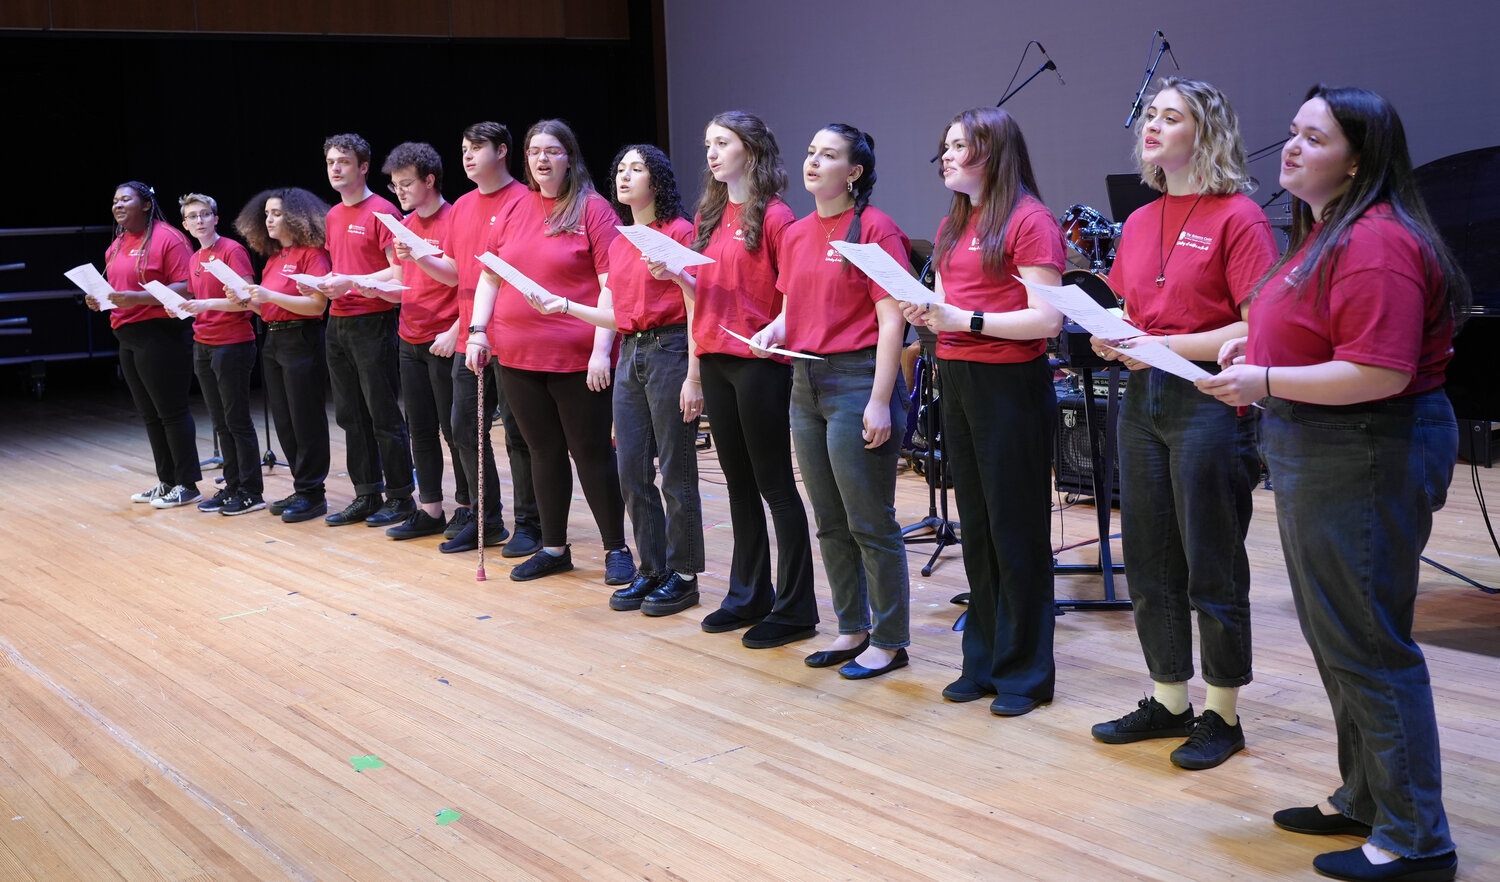 The Molloy University Acapella club, Music Therapy club, Performing Arts club, and Best Buddies club perform “Thank you for the Music” by ABBA.